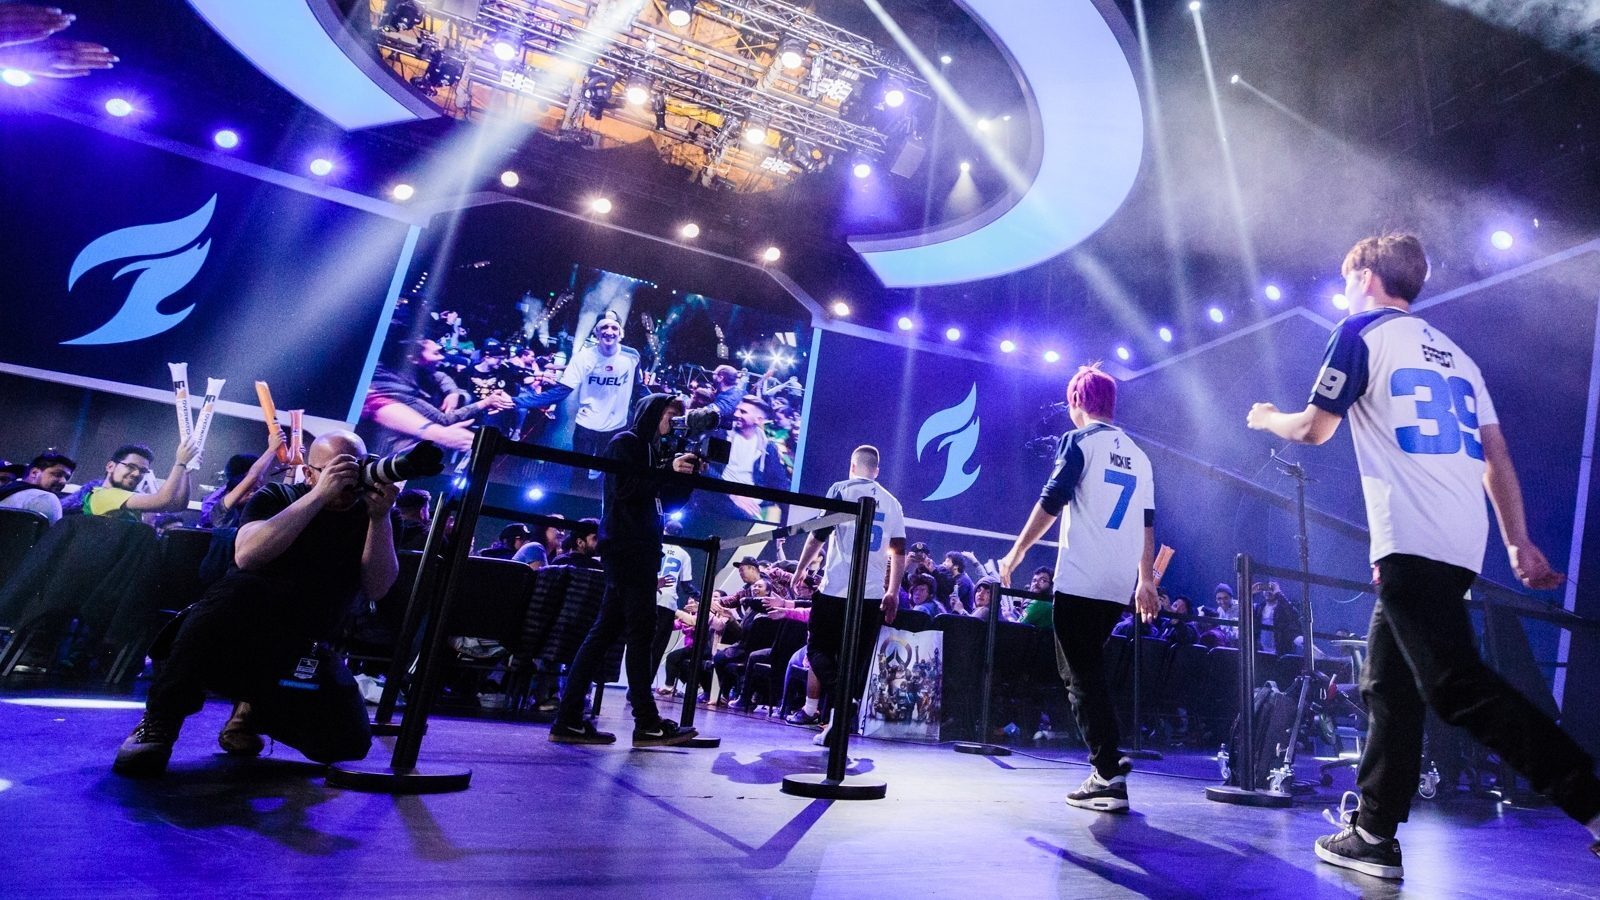 Closer will replace chipshajen on the Dallas Fuel, completing their trio of support players.